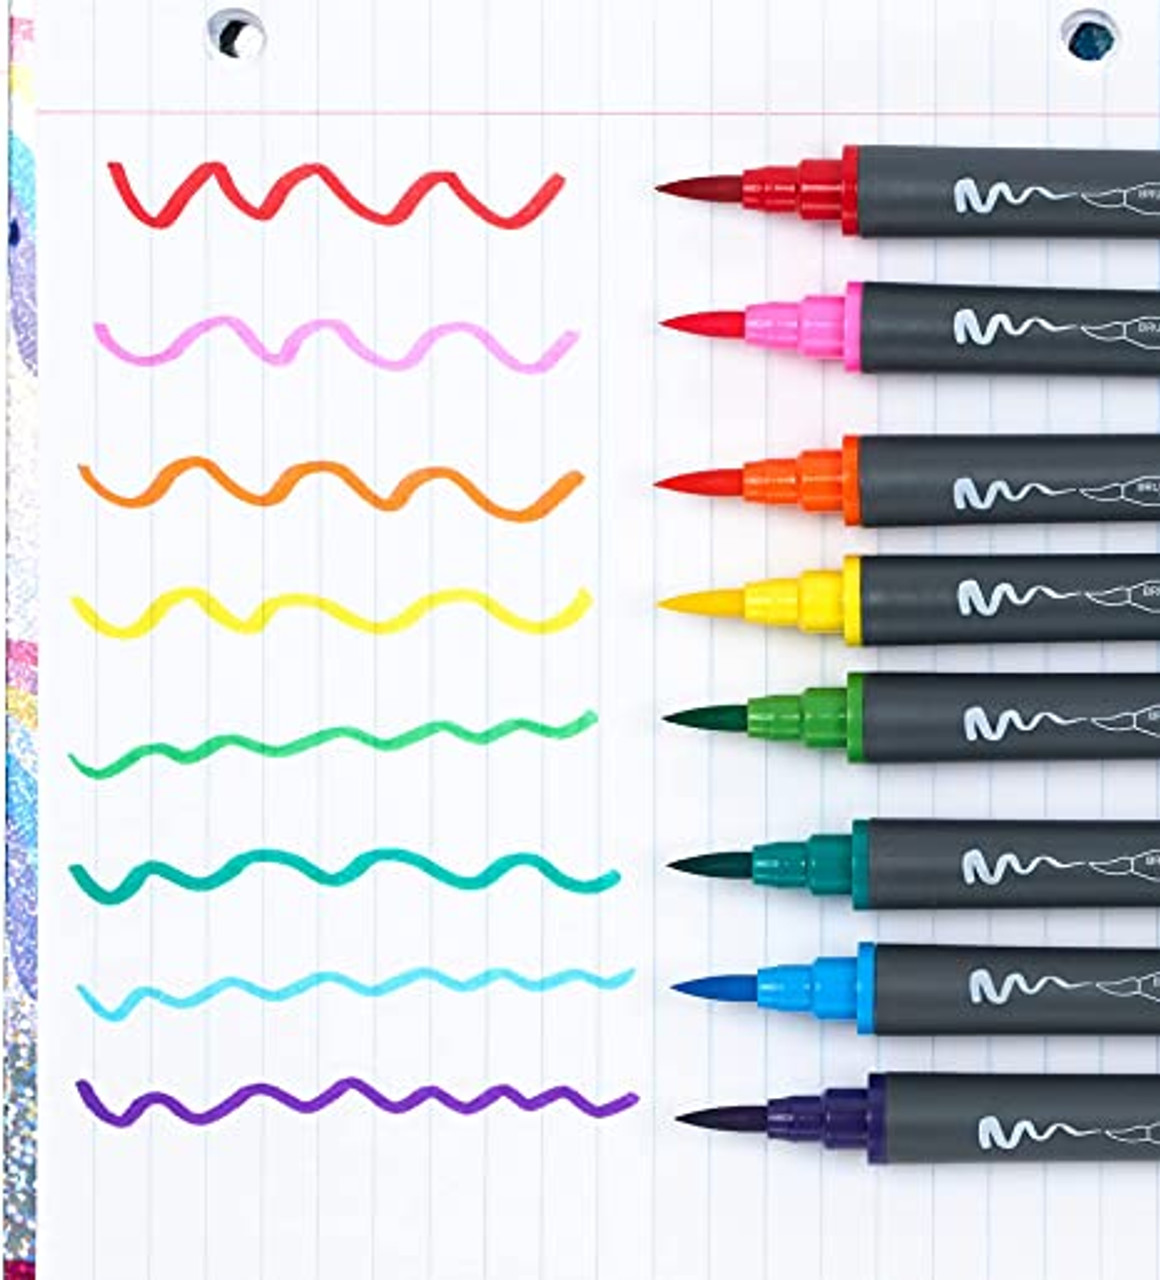 Stampables Scented Double-Ended Stamp Markers